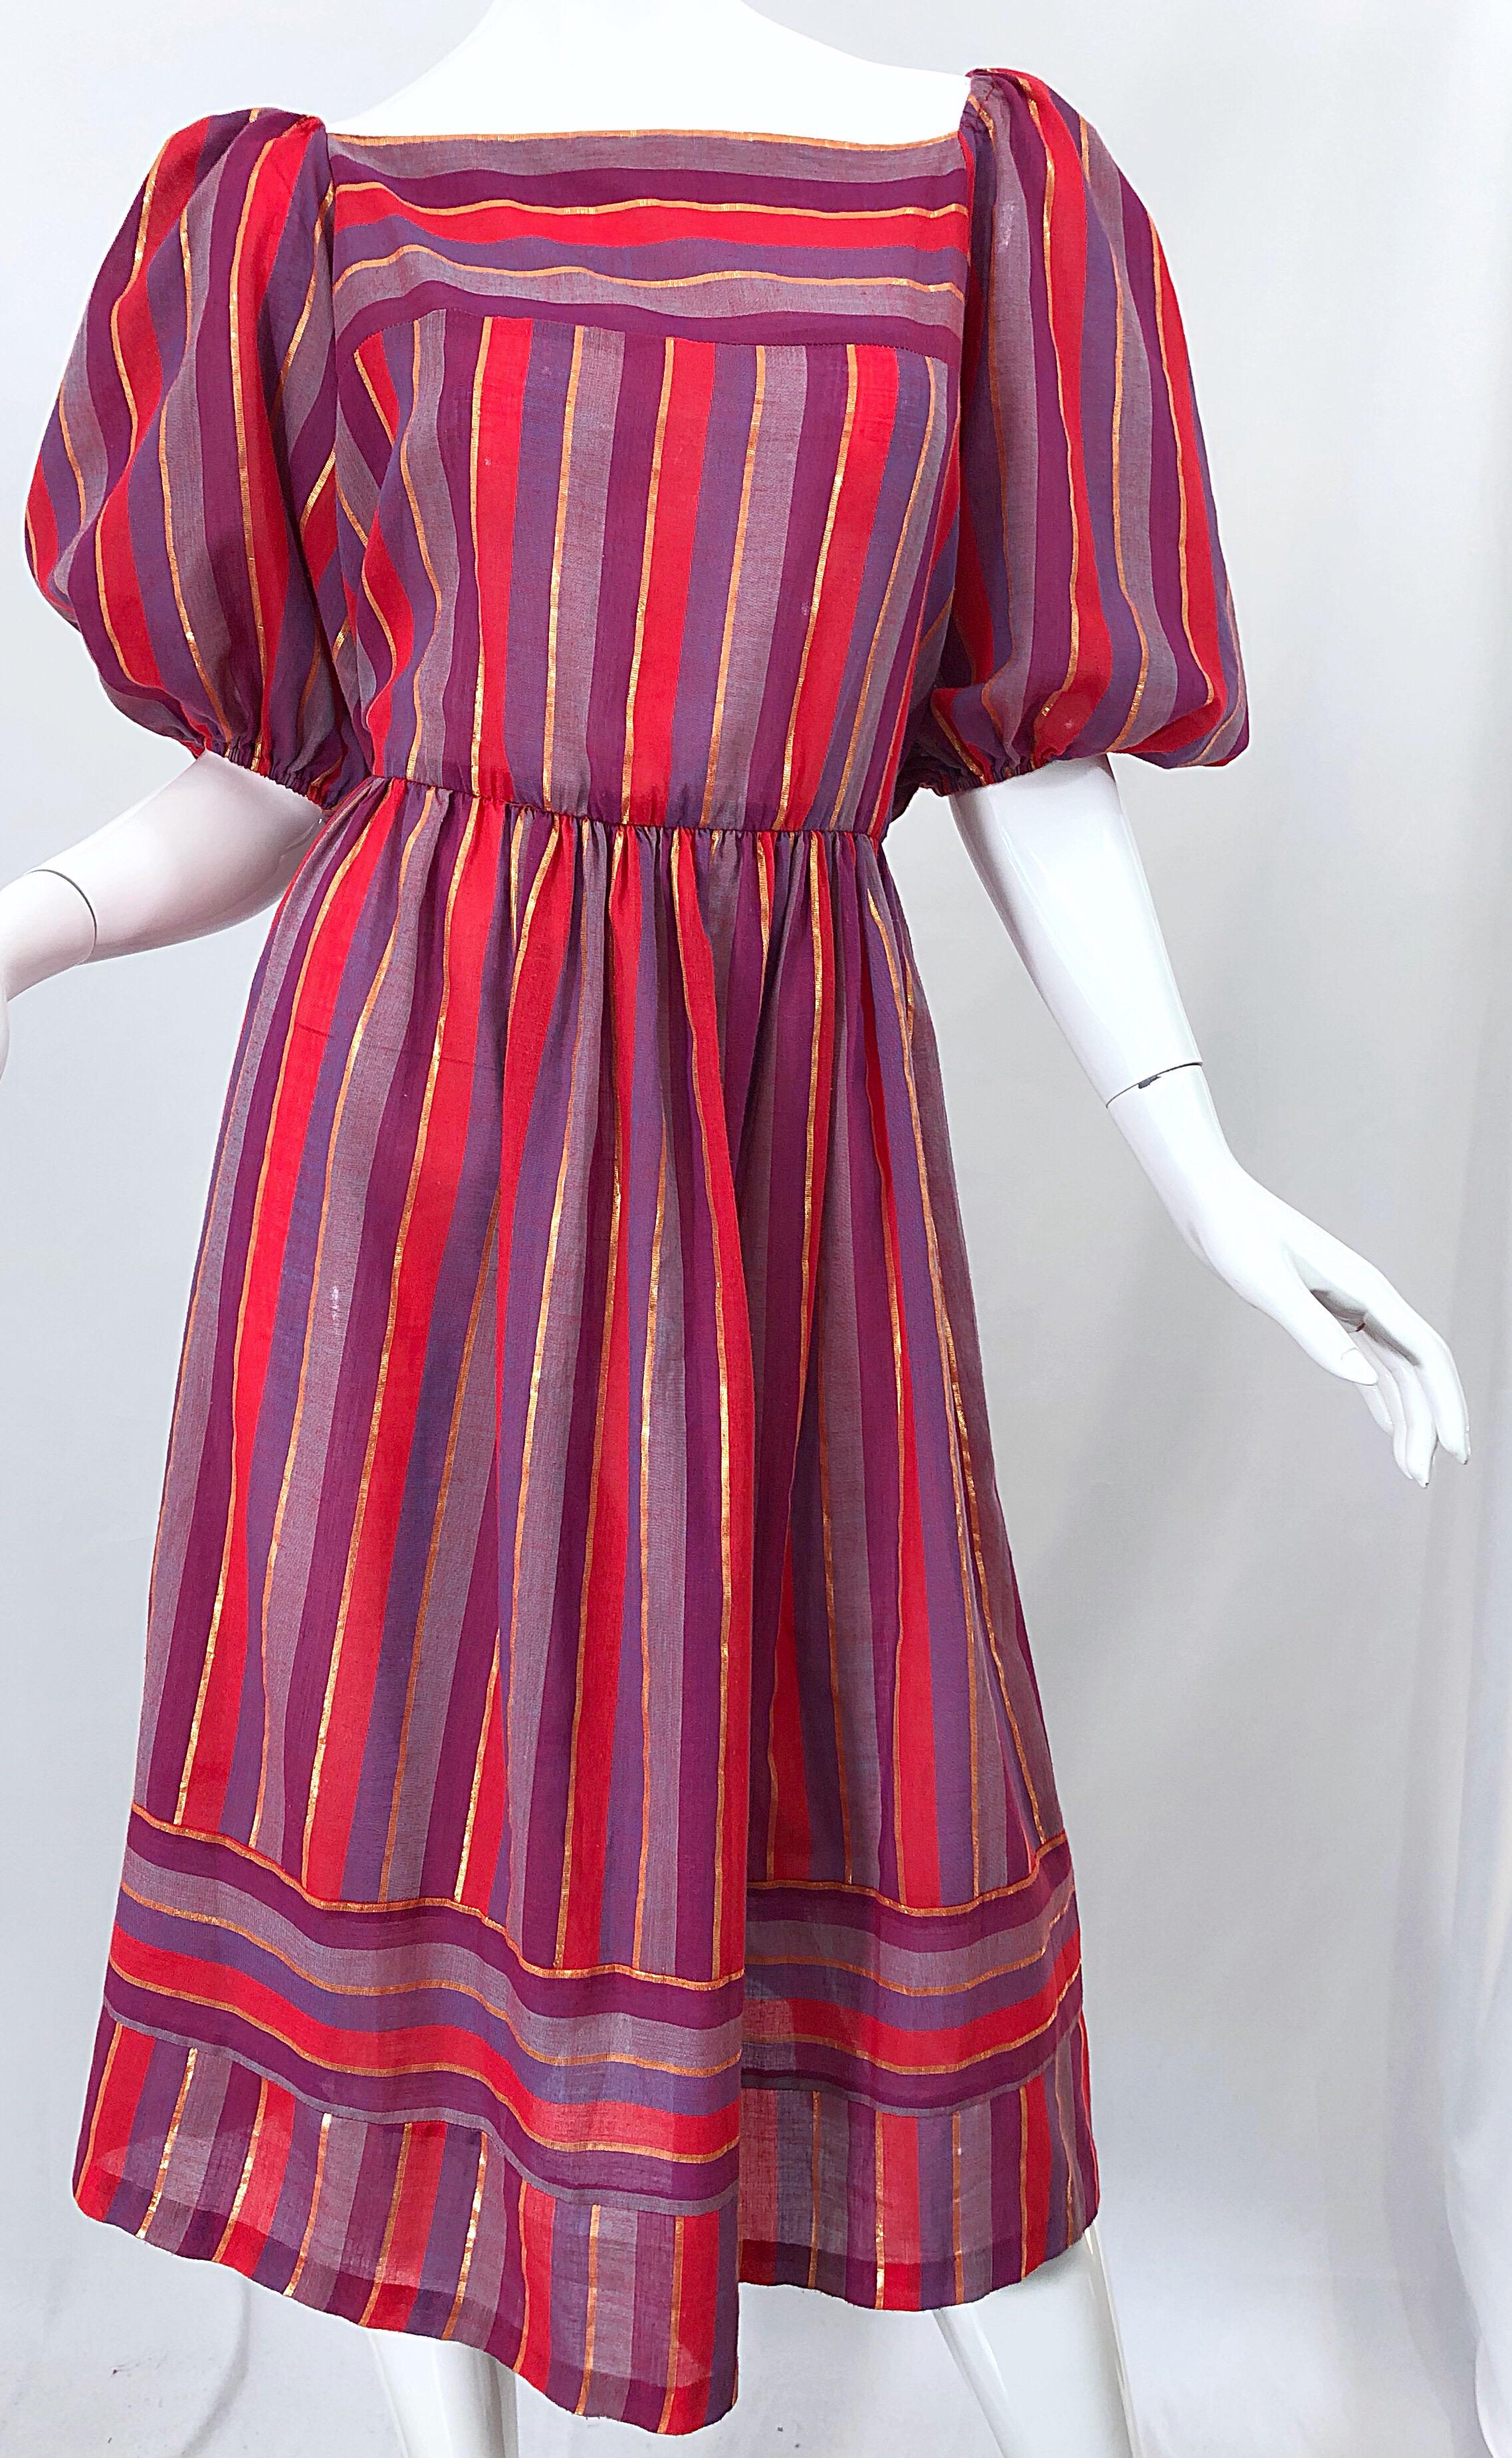 Women's 1970s Boho Chic Red + Purple + Gold Striped Cotton Voile 70s Vintage Dress For Sale